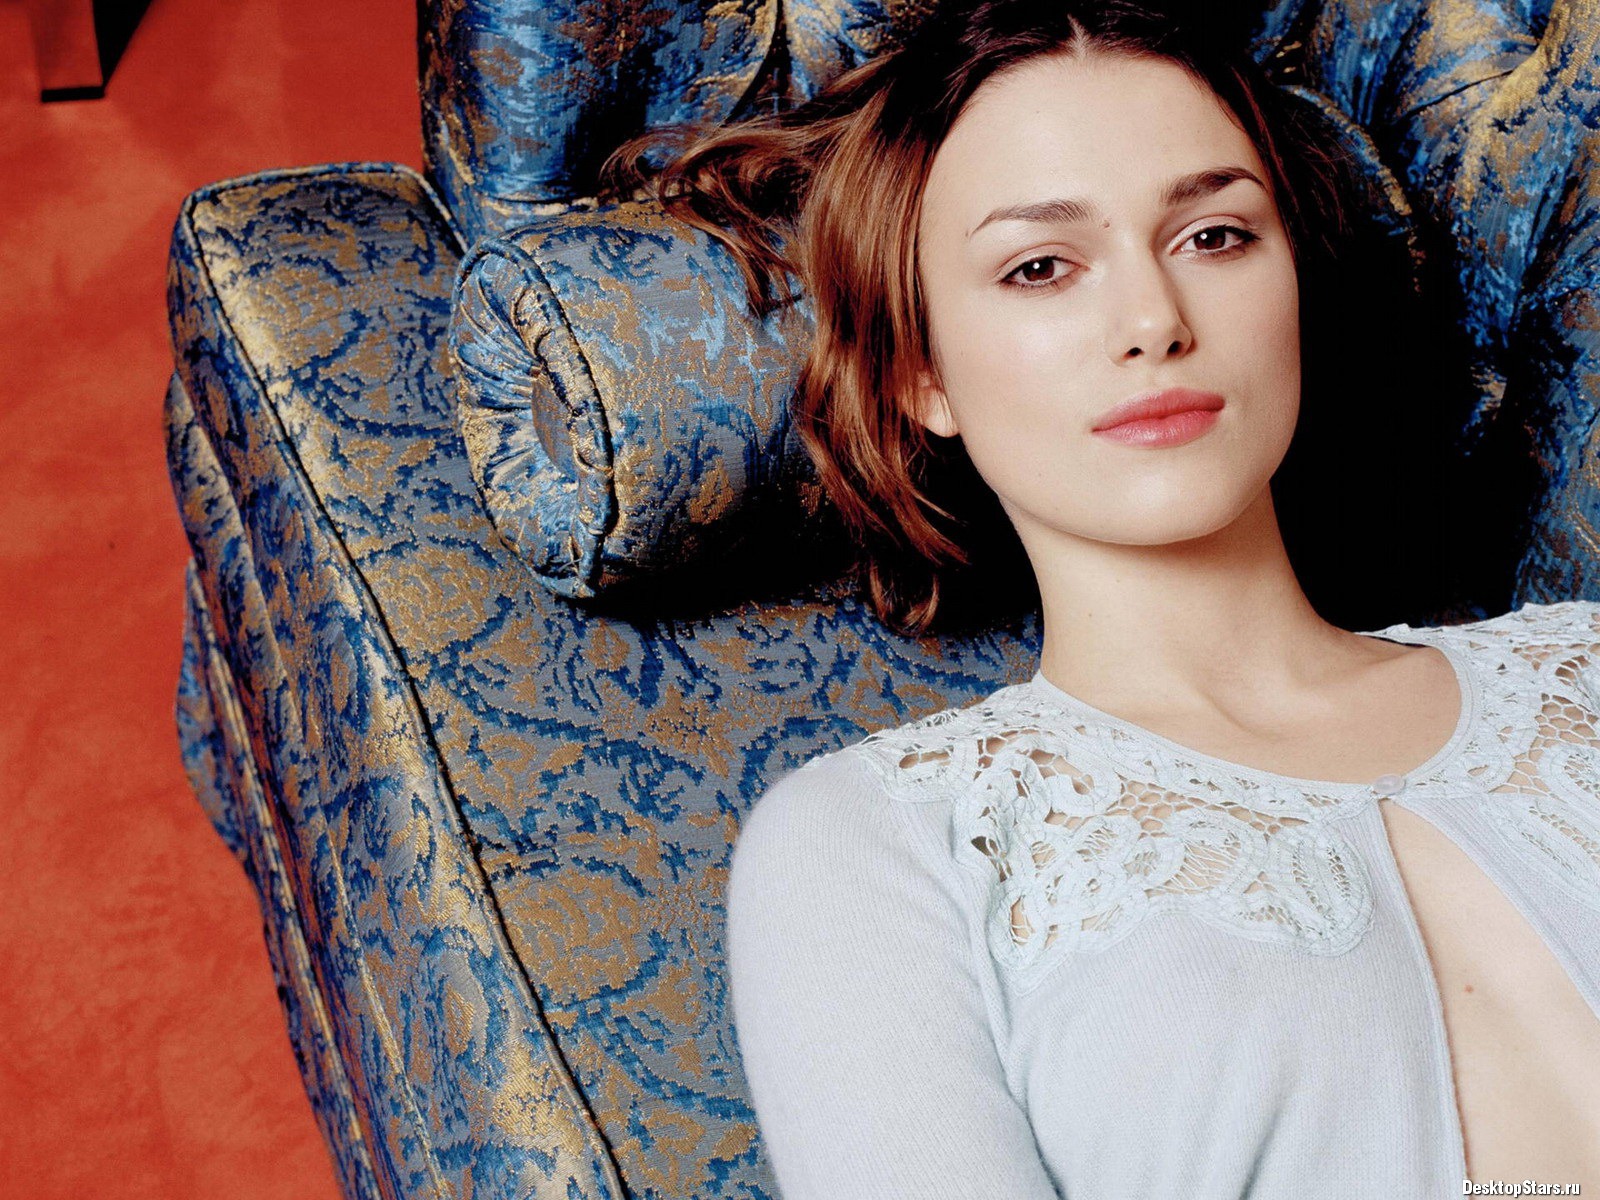 Keira Knightley #024 - 1600x1200 Wallpapers Pictures Photos Images